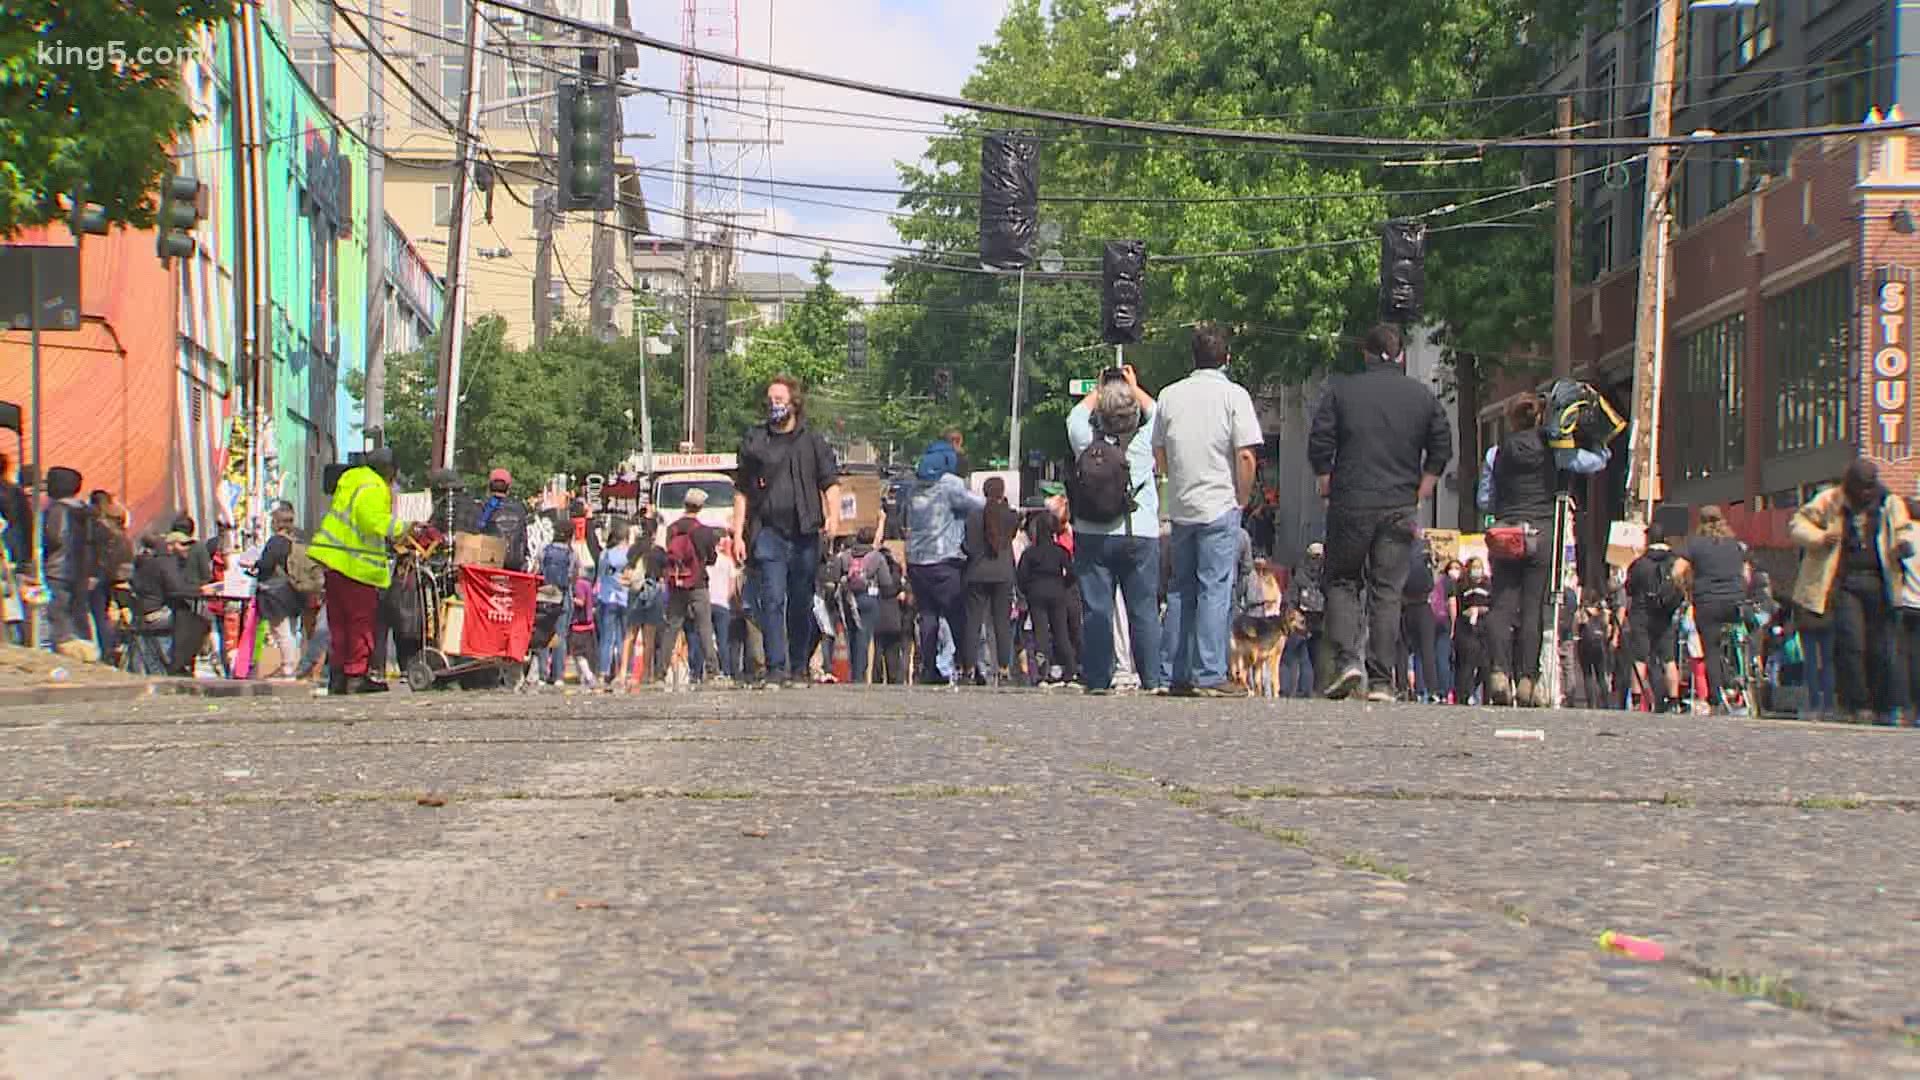 Seattle Police have opened up streets in the Capitol Hill neighborhood and are "meeting peace with peace".